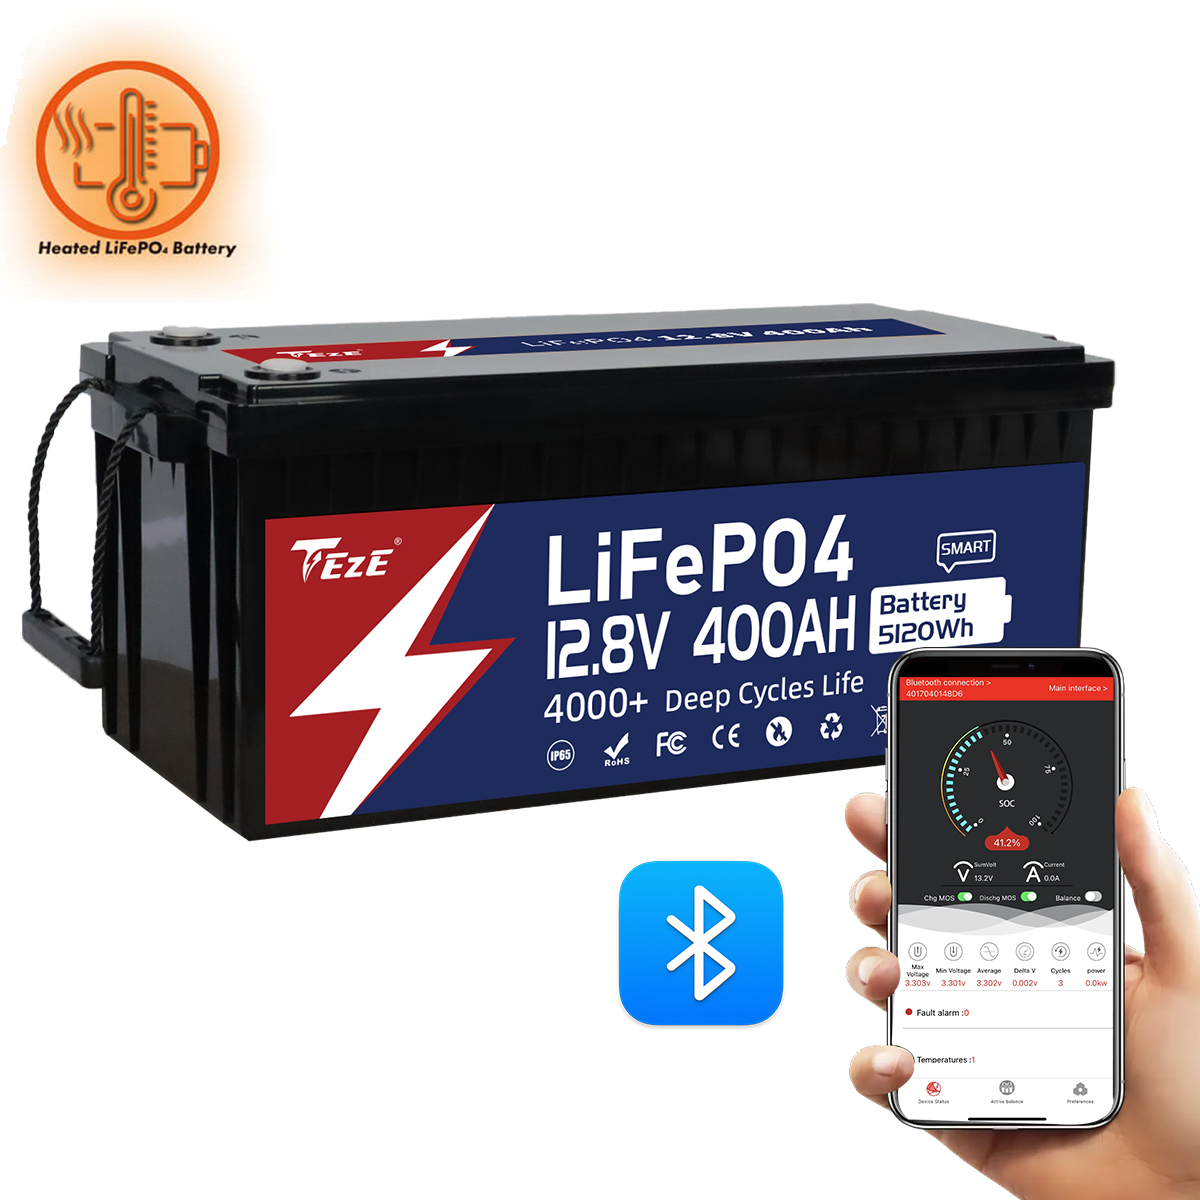 TezePower 12V 400Ah LiFePO4 Battery with RS485/RS232/CAN Communication Ports, Bluetooth, Self-heating and Active Balancer, Built-in 250A Daly BMS(Bluetooth Built-in Version)-TezePower